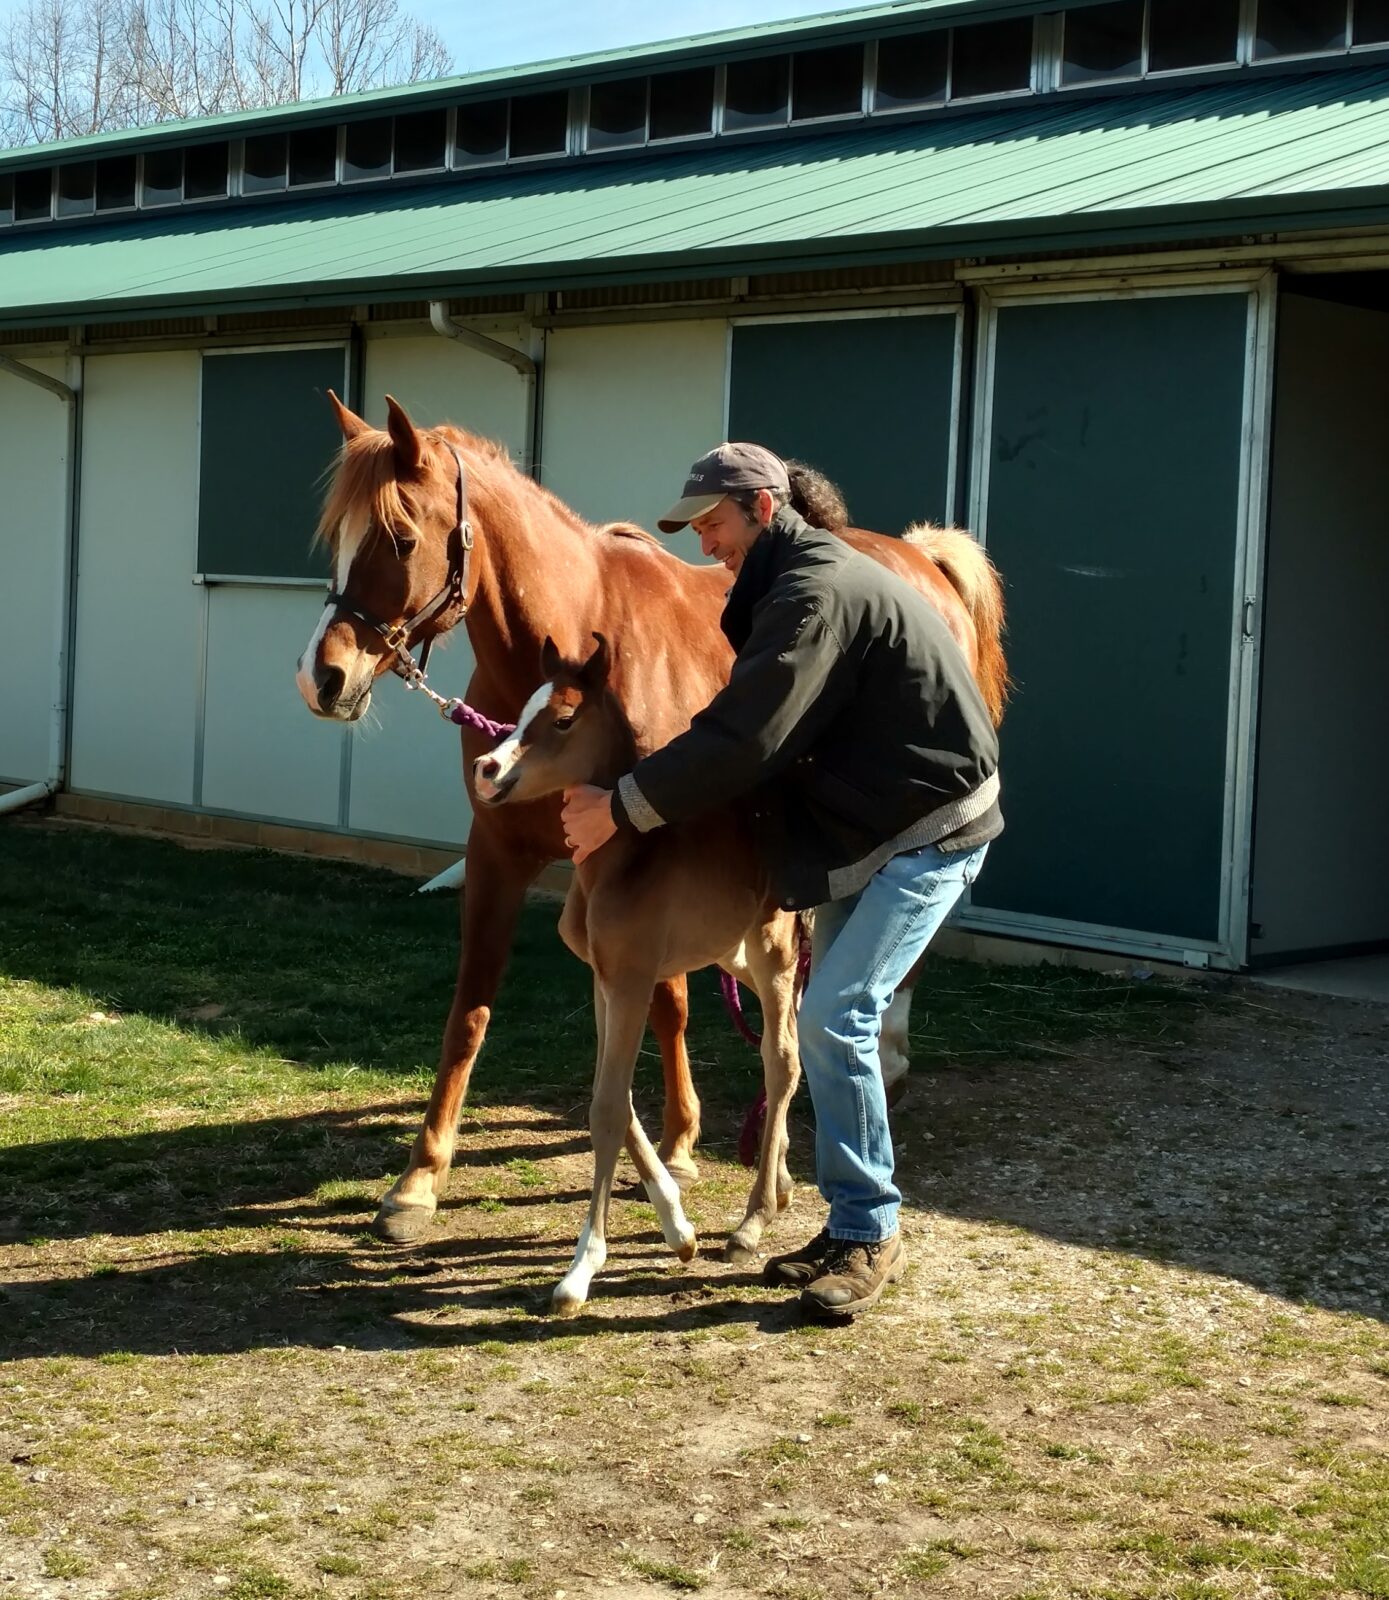 Finally…..a filly for the Crabtrees!!